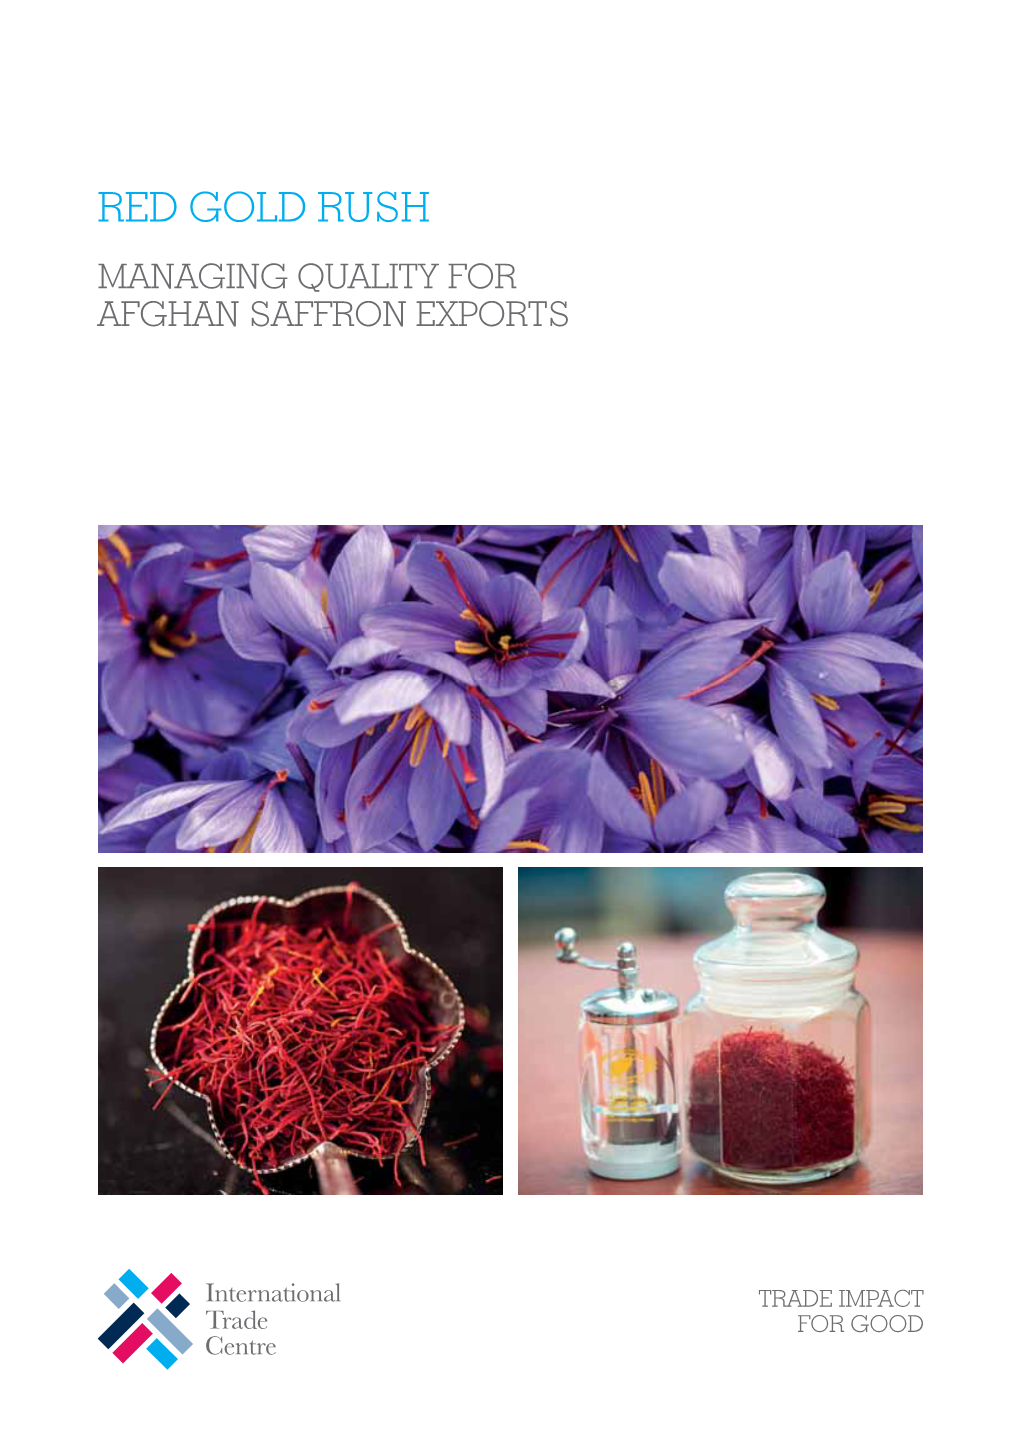 Red Gold Rush Managing Quality for Afghan Saffron Exports